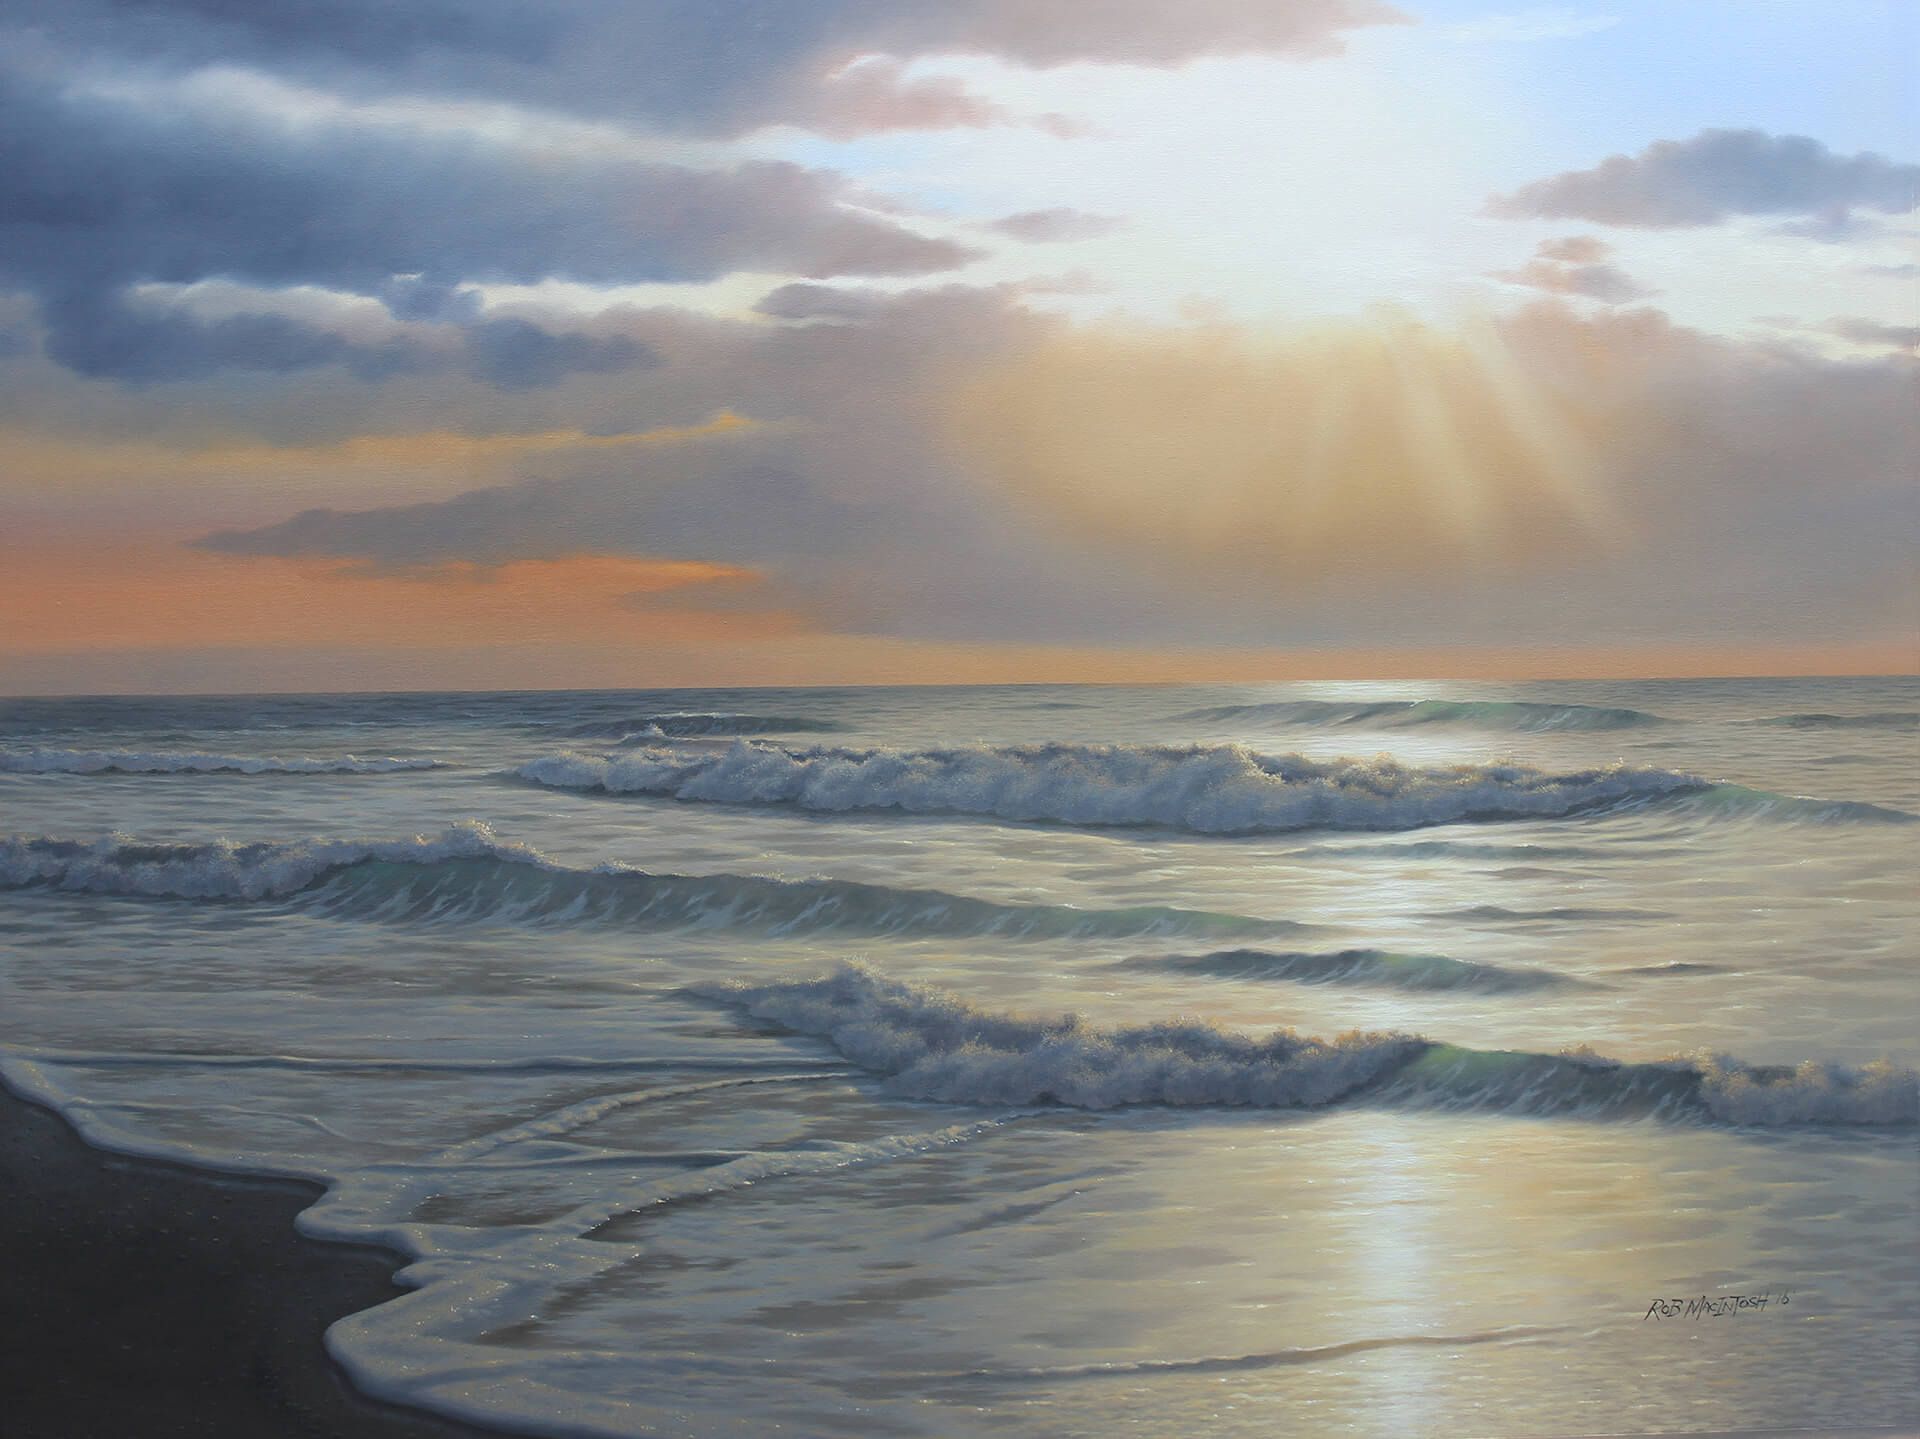 Photorealistic painting of a sunset over gentle waves lapping on a beach